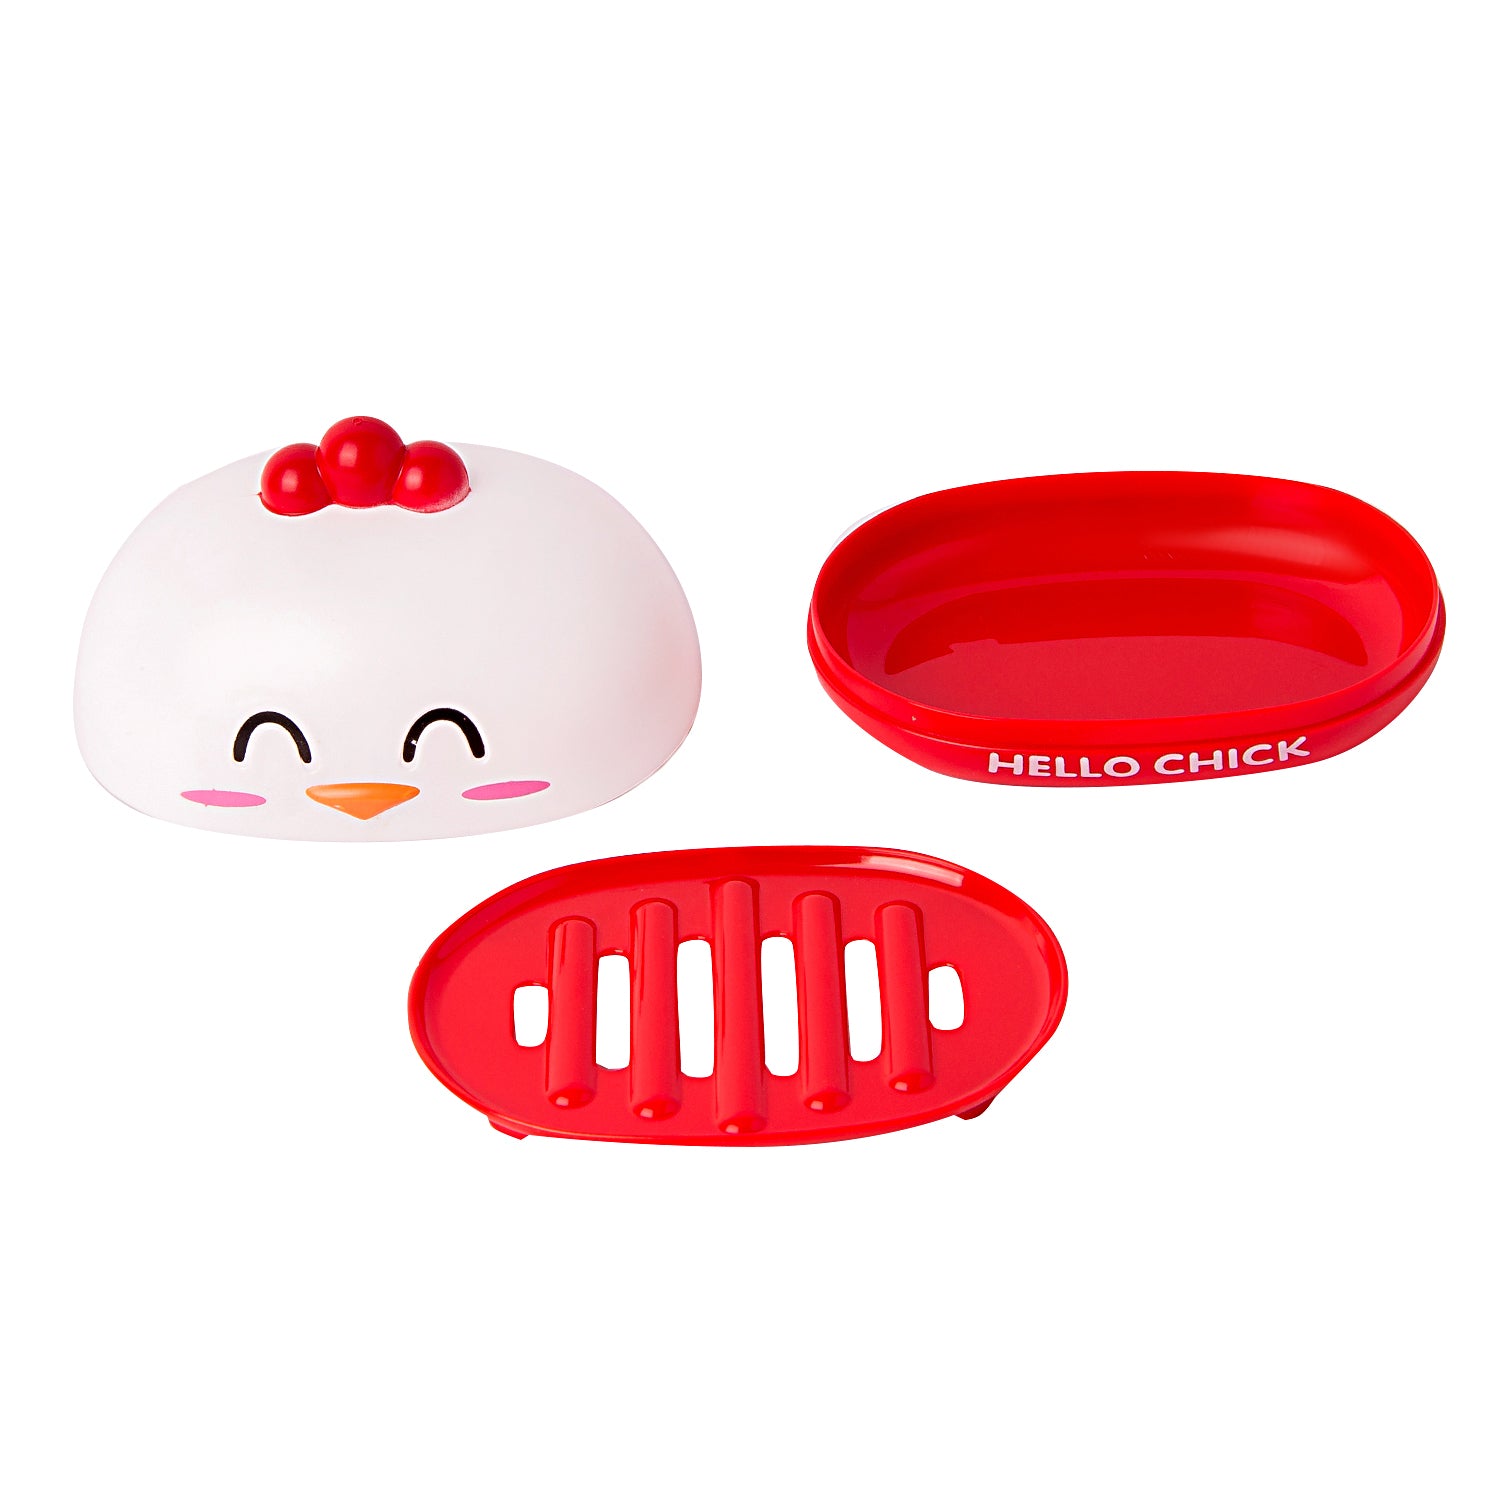 Chick Red Soap Box - Baby Moo